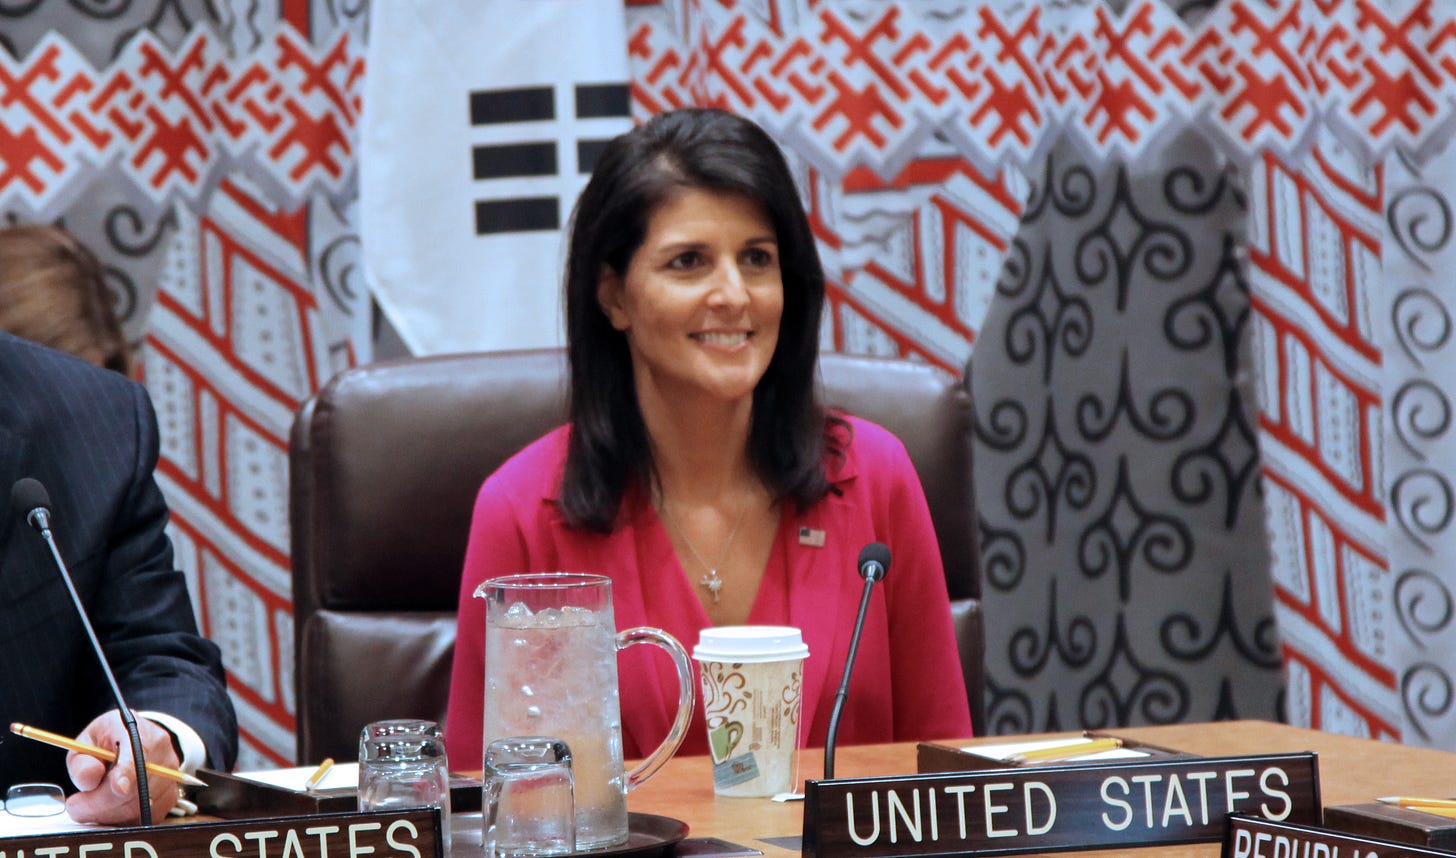 Nikki Haley seated behind a UNITED STATES label.